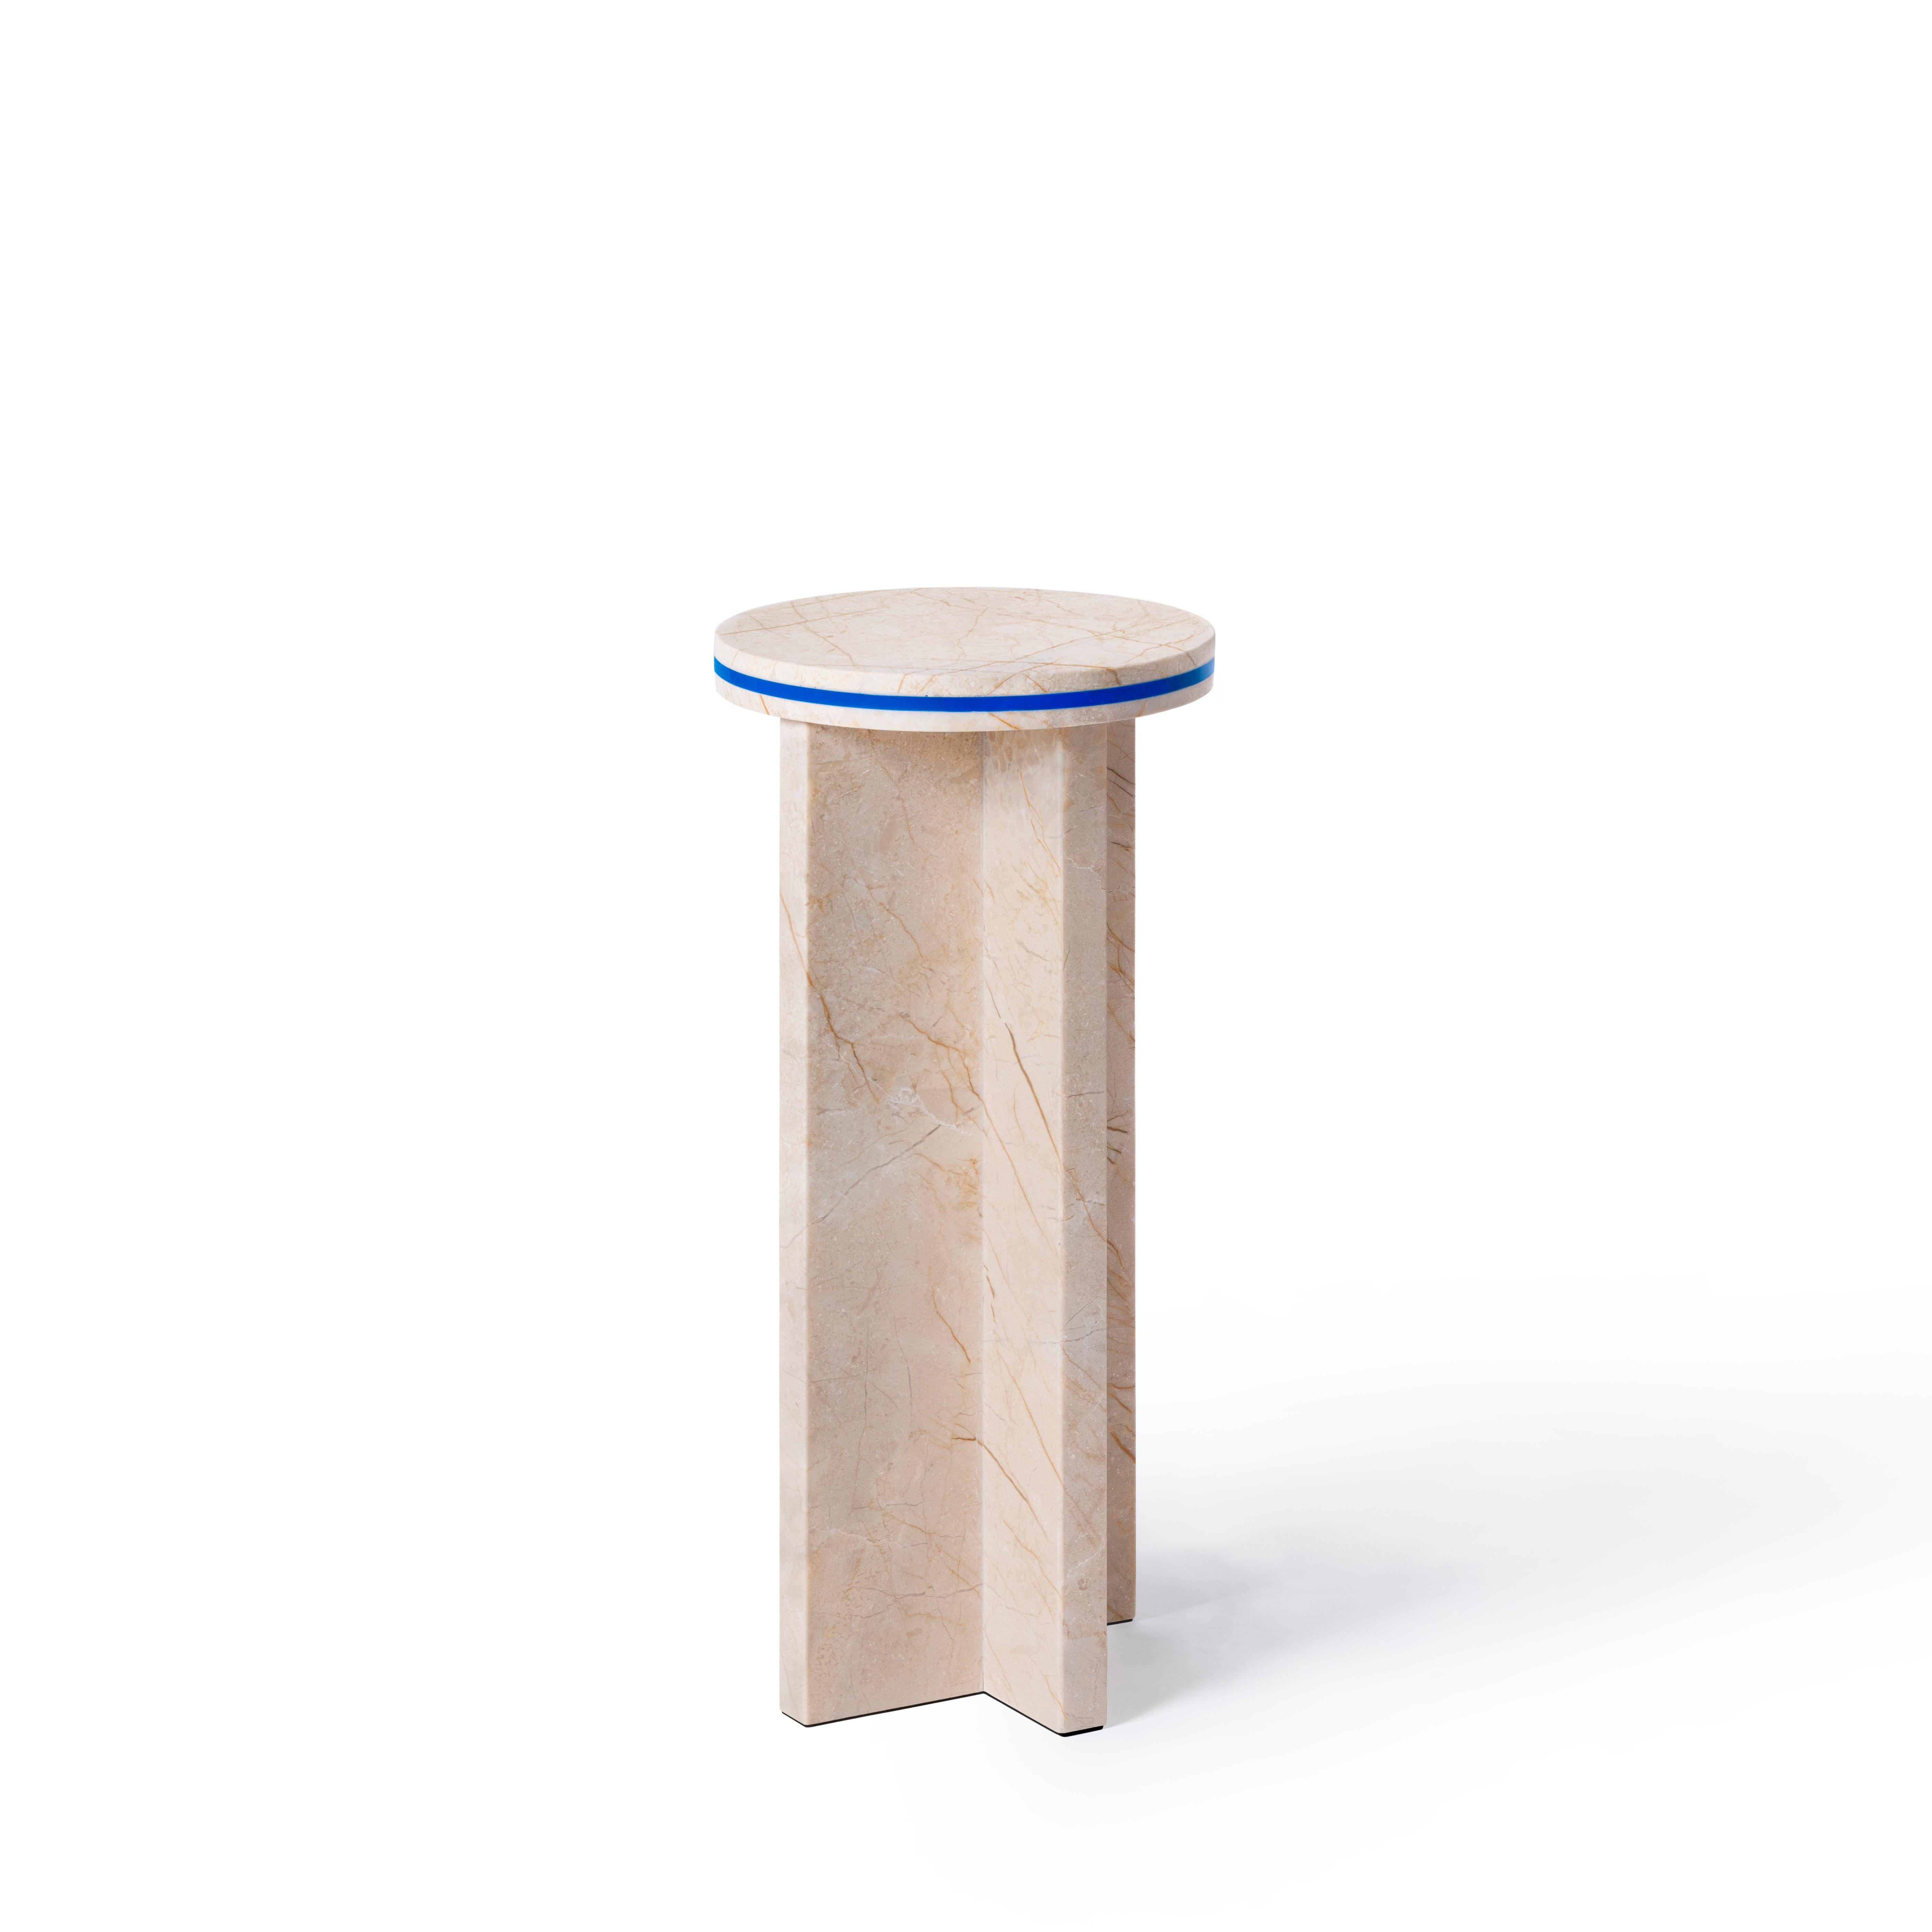 'Dislocation' collection by Buzao, small table
Golden Sunset marble, blue acrylic
Measures: 26 x 26 x H 54 cm

Studio Buzao from Guangzhou (China) is exploring innovation with furniture and lighting design. From marble to lava stone, from